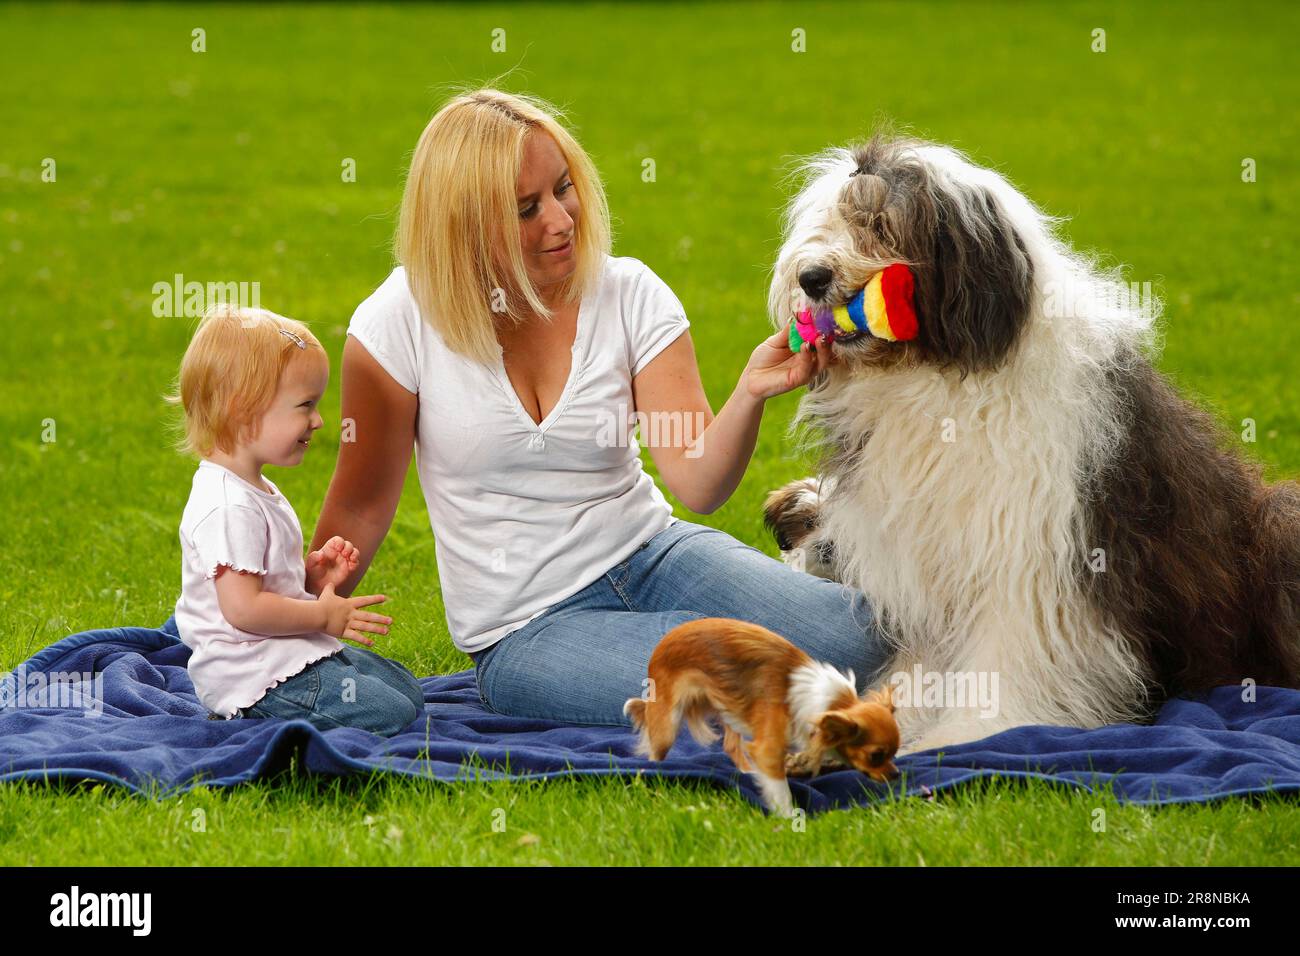 Old English Sheepdog Resting In Green Grass Stock Photo, Picture